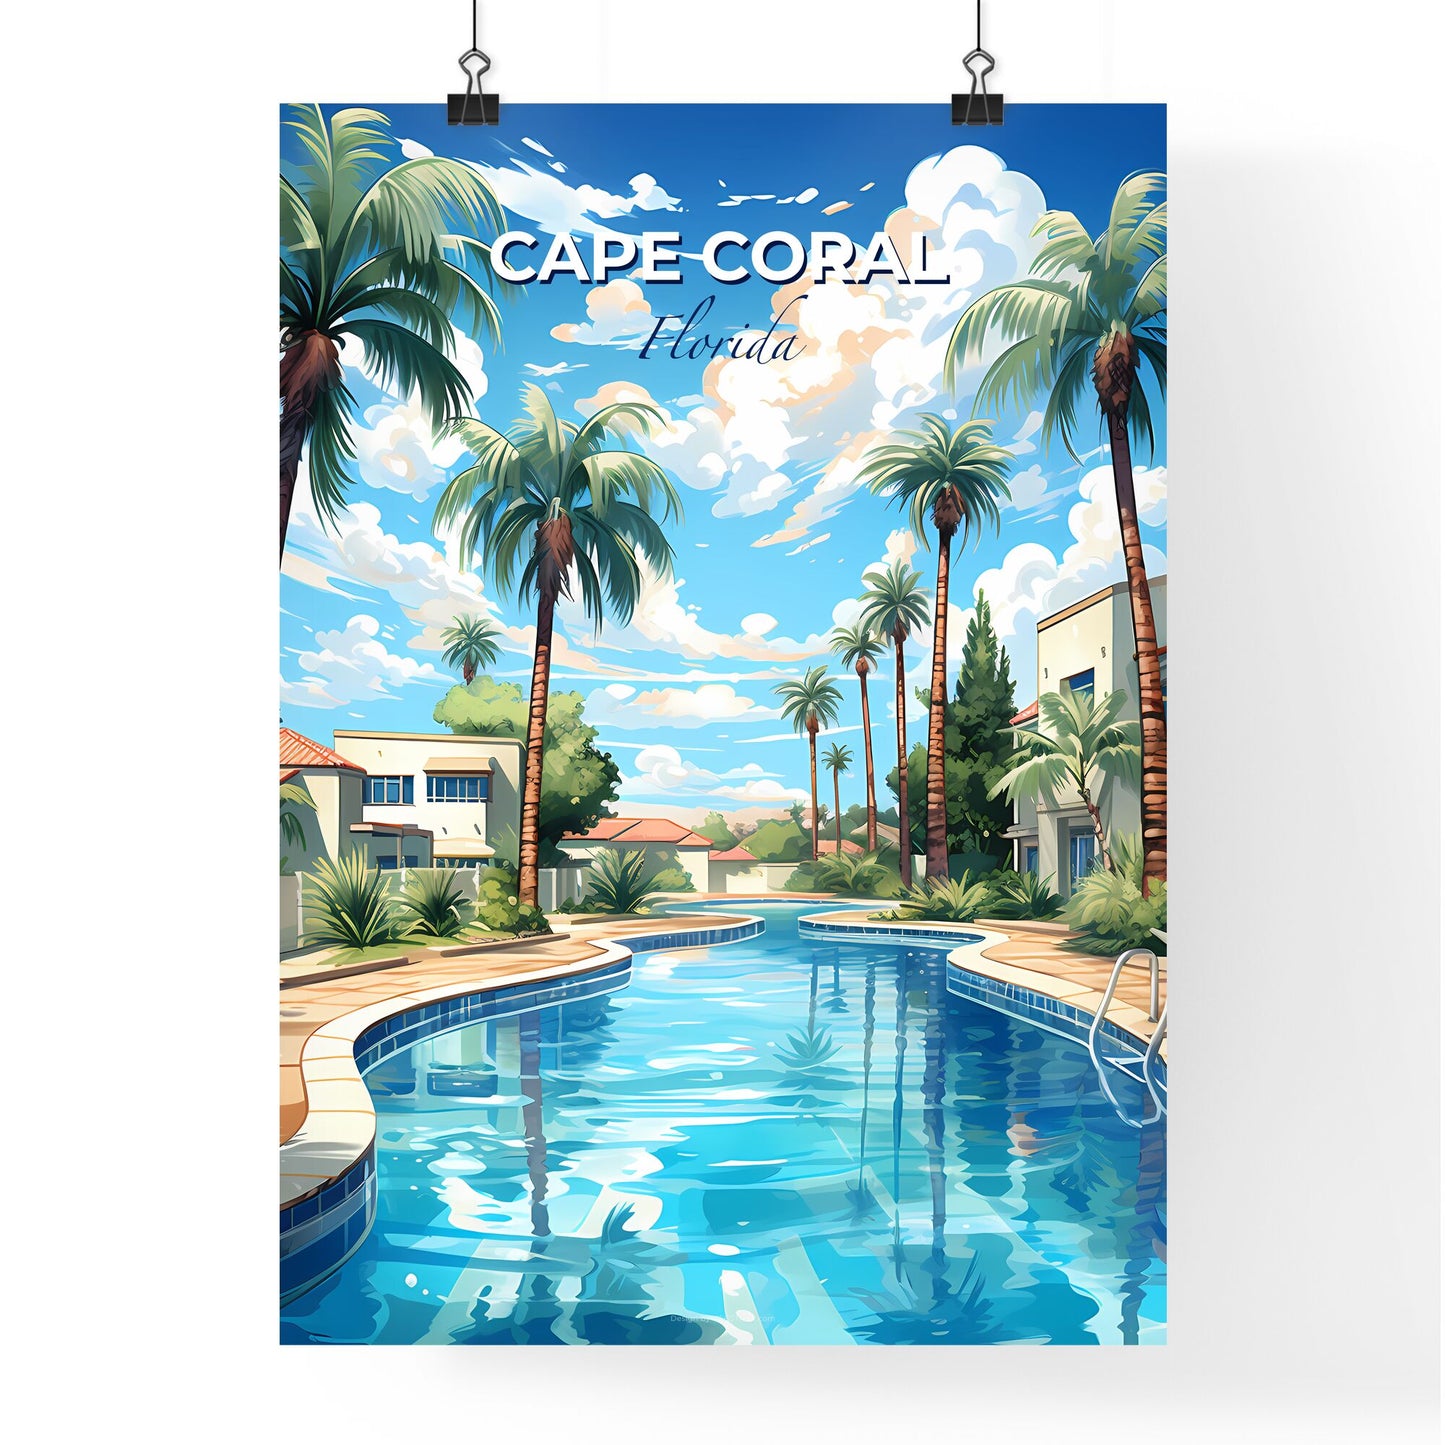 Cape Coral, Florida, A Poster of a swimming pool with palm trees and buildings Default Title